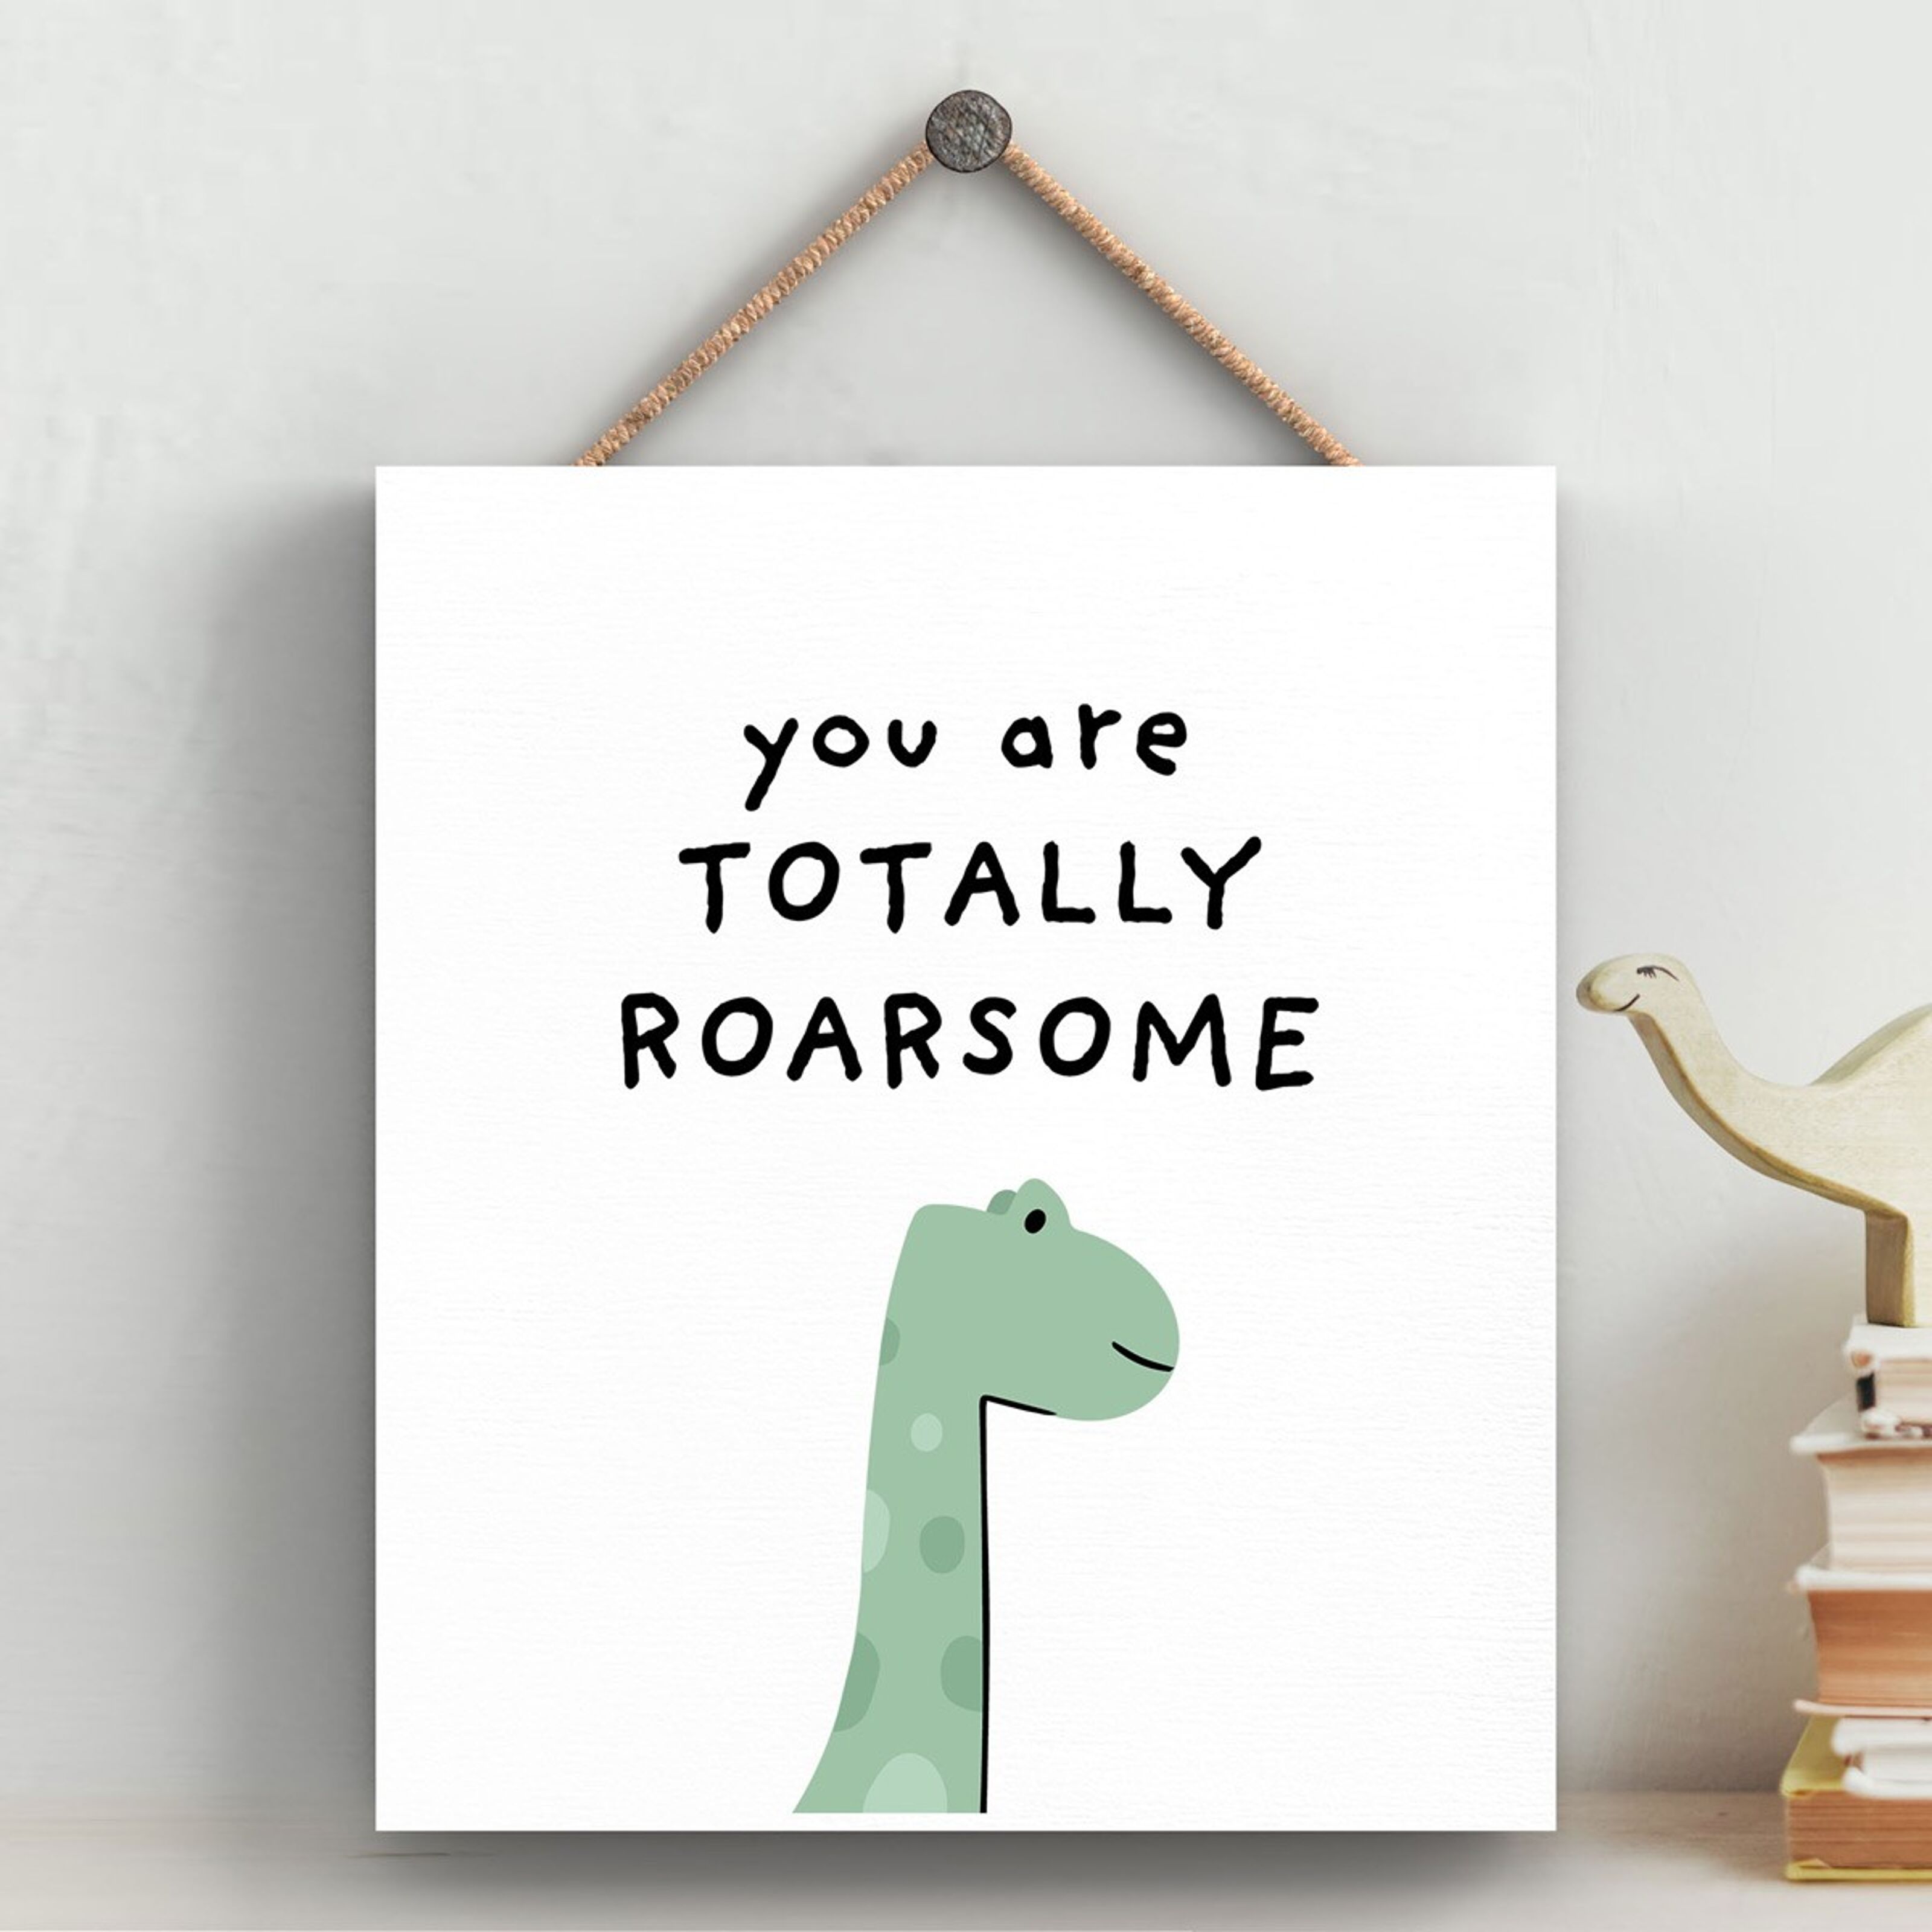 You are totally roarsome!